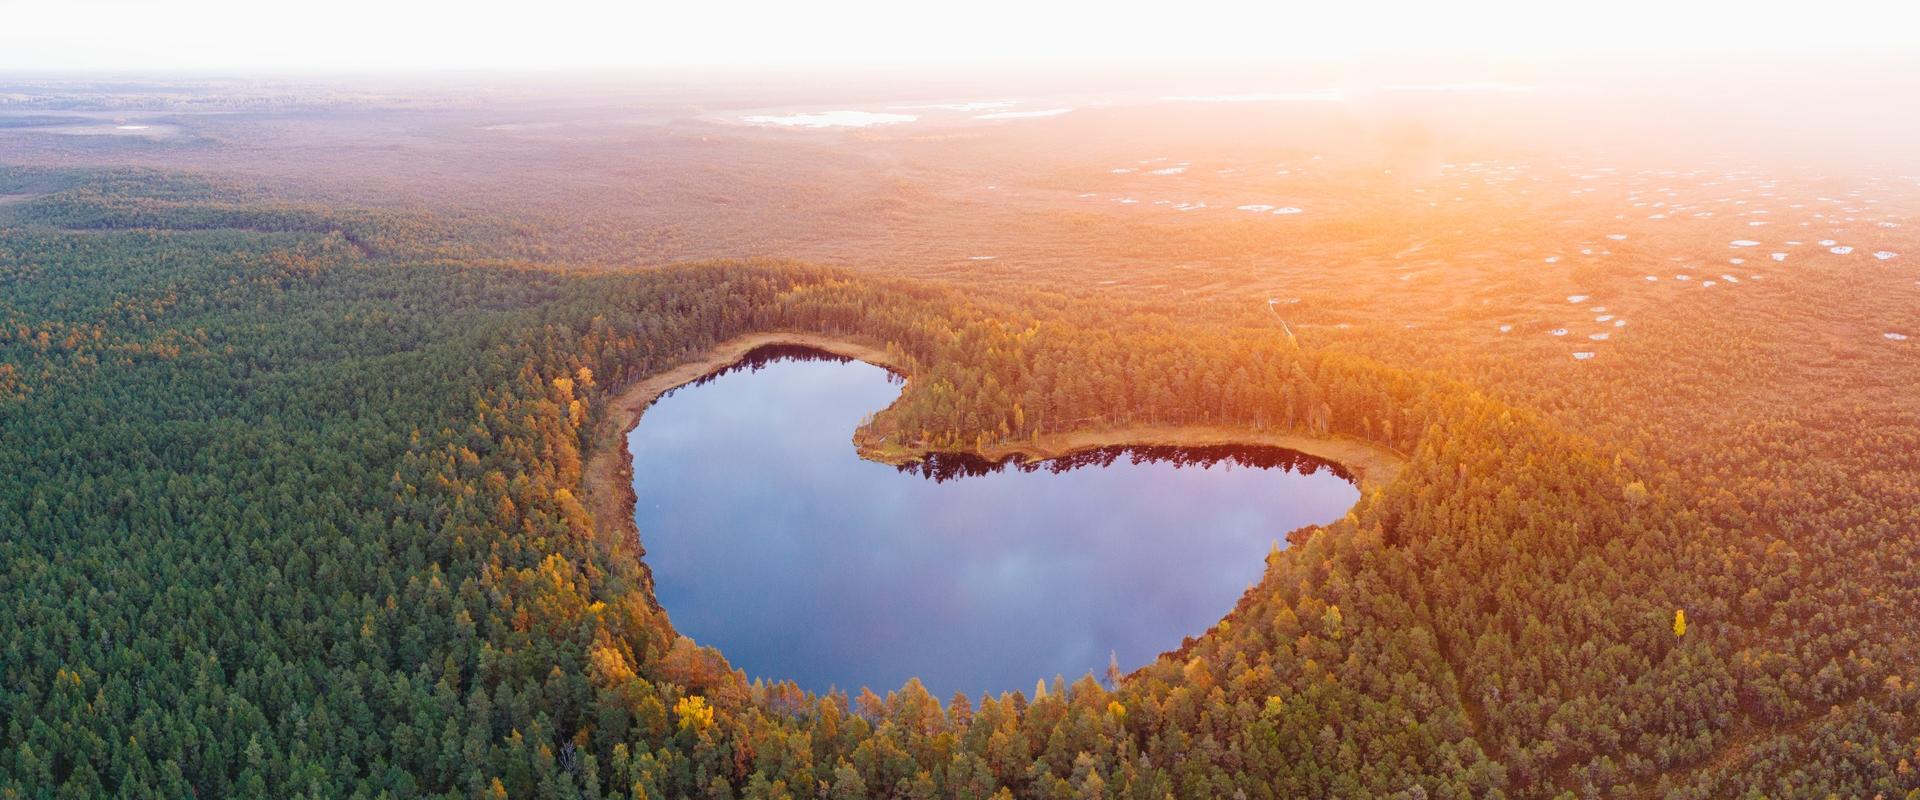 The trail at Lake Parika Väikejärv is famous for its heart-shaped bog lake. The trail runs through the forest and rises to the brink of the bog, where